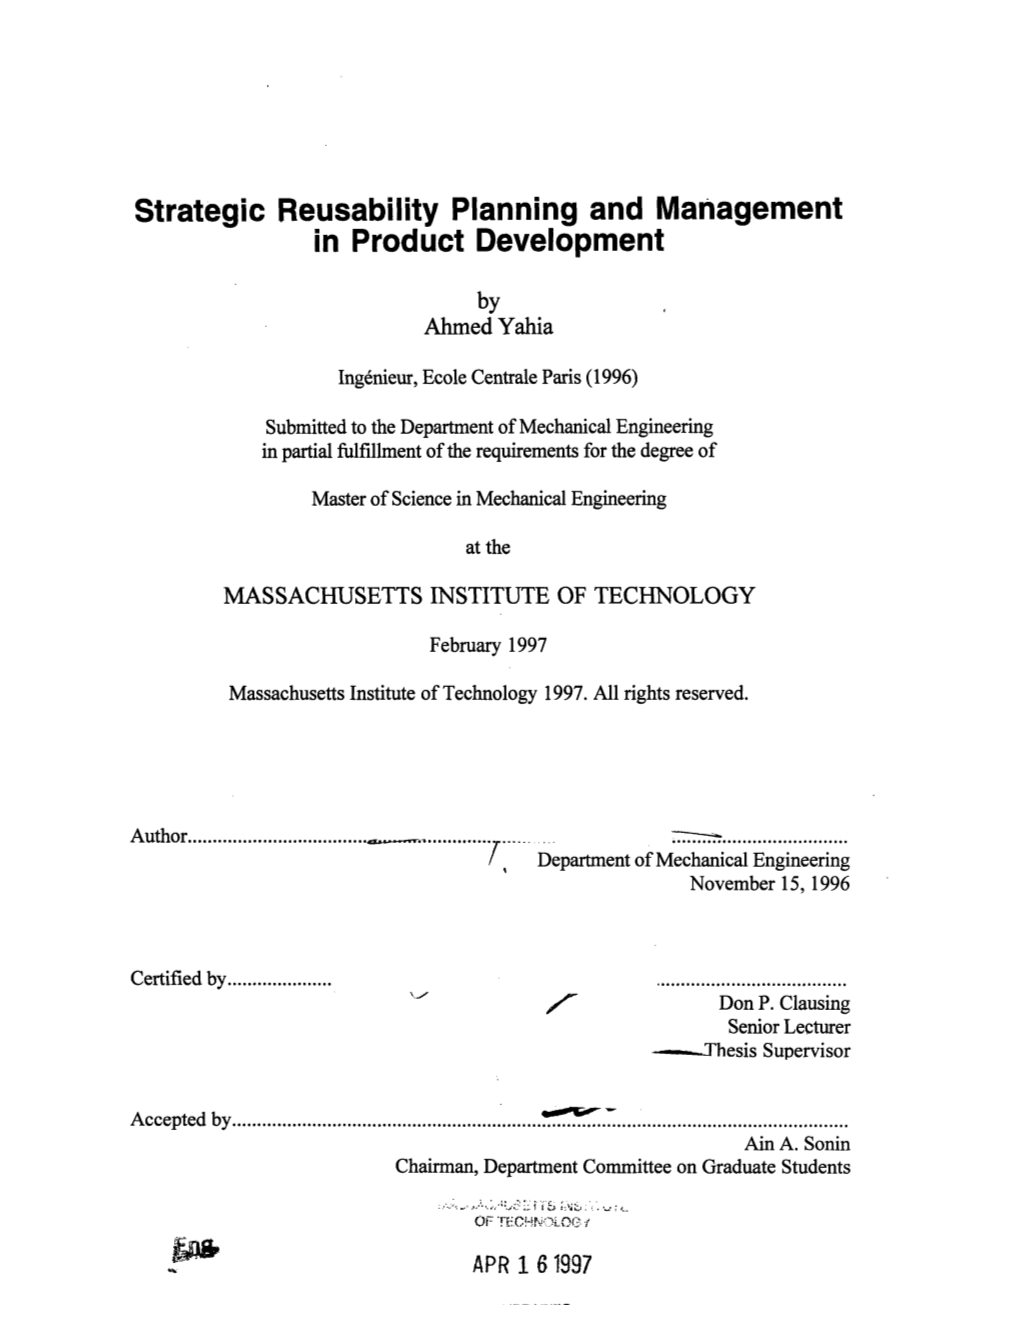 Reusability Planning and Management in Product Development